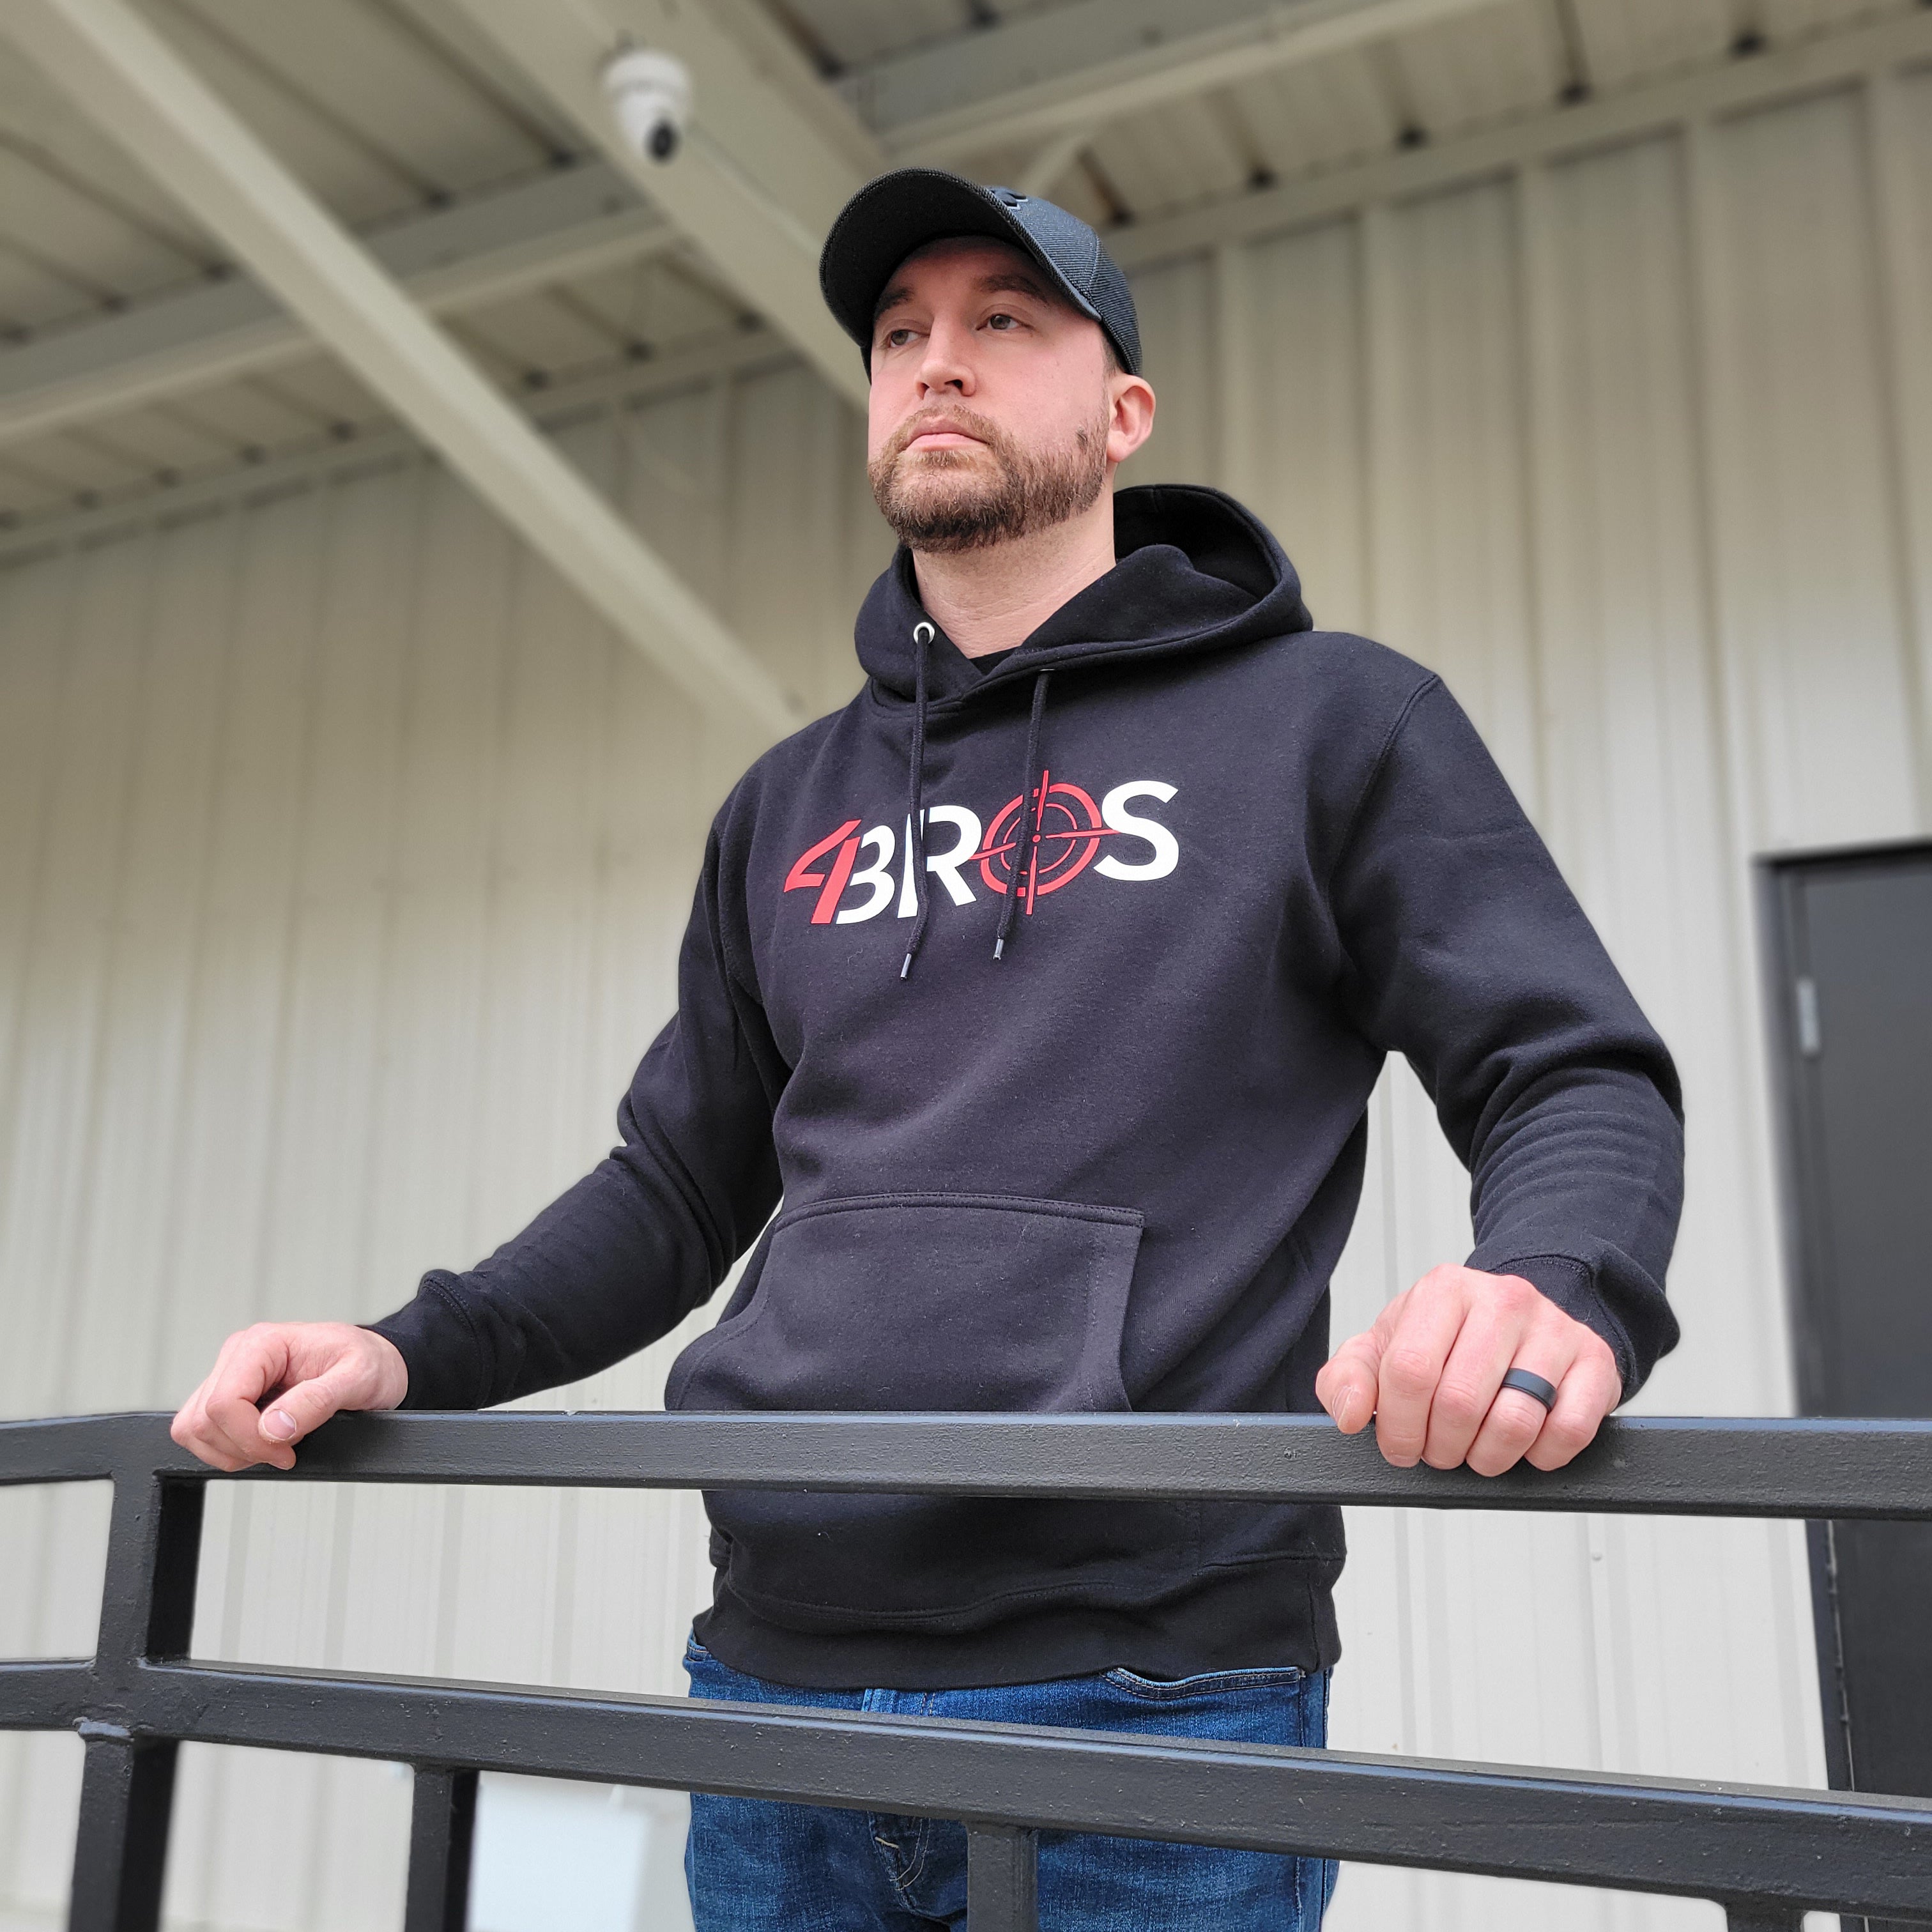 Introducing the Four Brothers Classic Mid-Weight Black Hoodie designed for comfort, style, and sustainability. This unisex hoodie offers an incredibly soft feel and balance between warmth and breathability. Everyday Comfort and Concealed Carry, this hoodie is perfect for concealed firearm carry. Printed in Logansport 